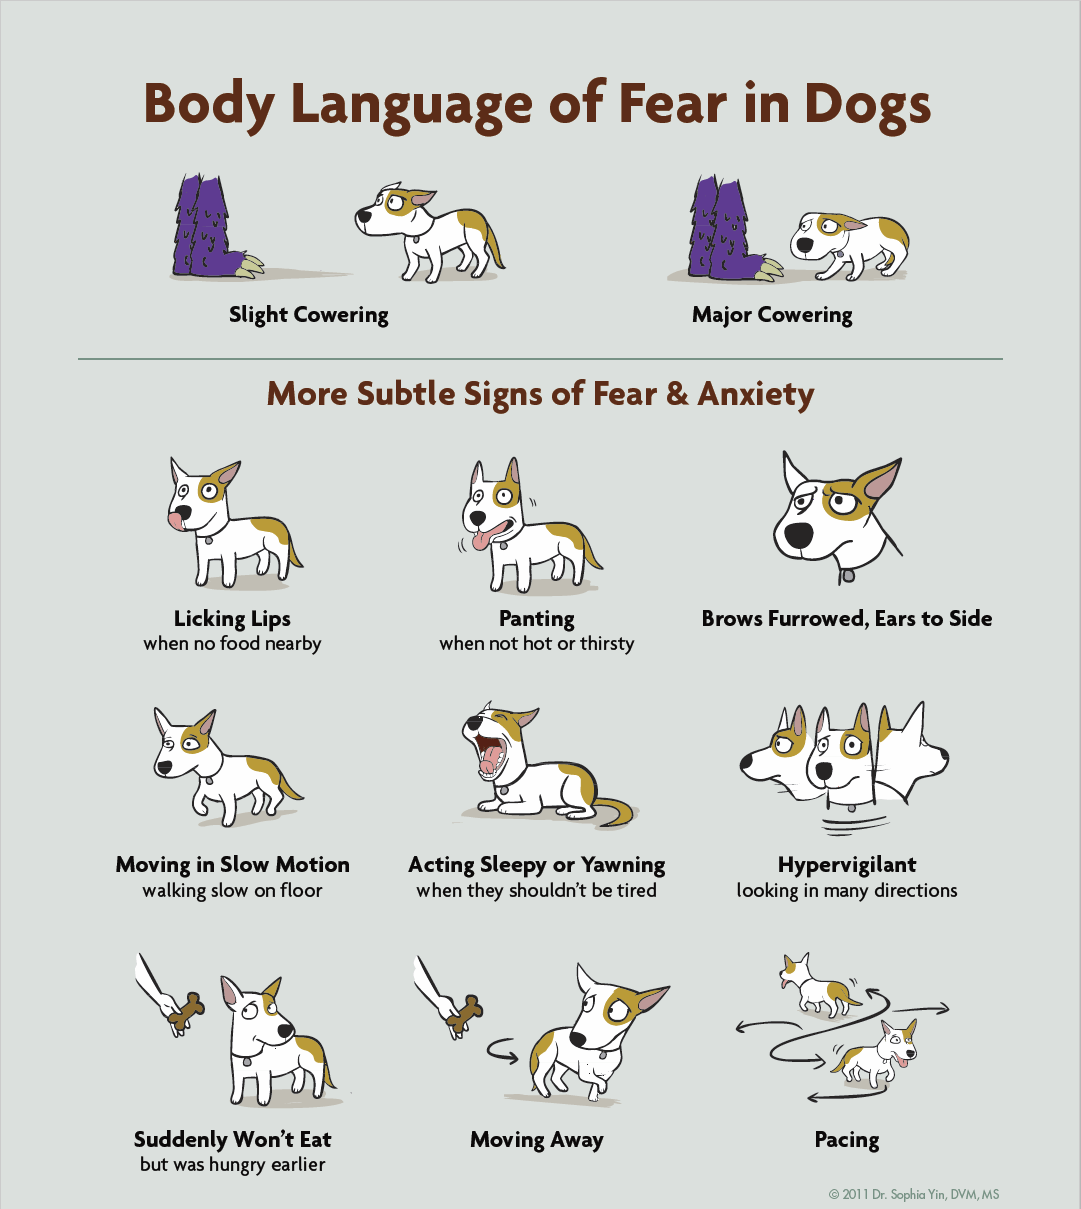 Doggy Body Language - From A Dog's View